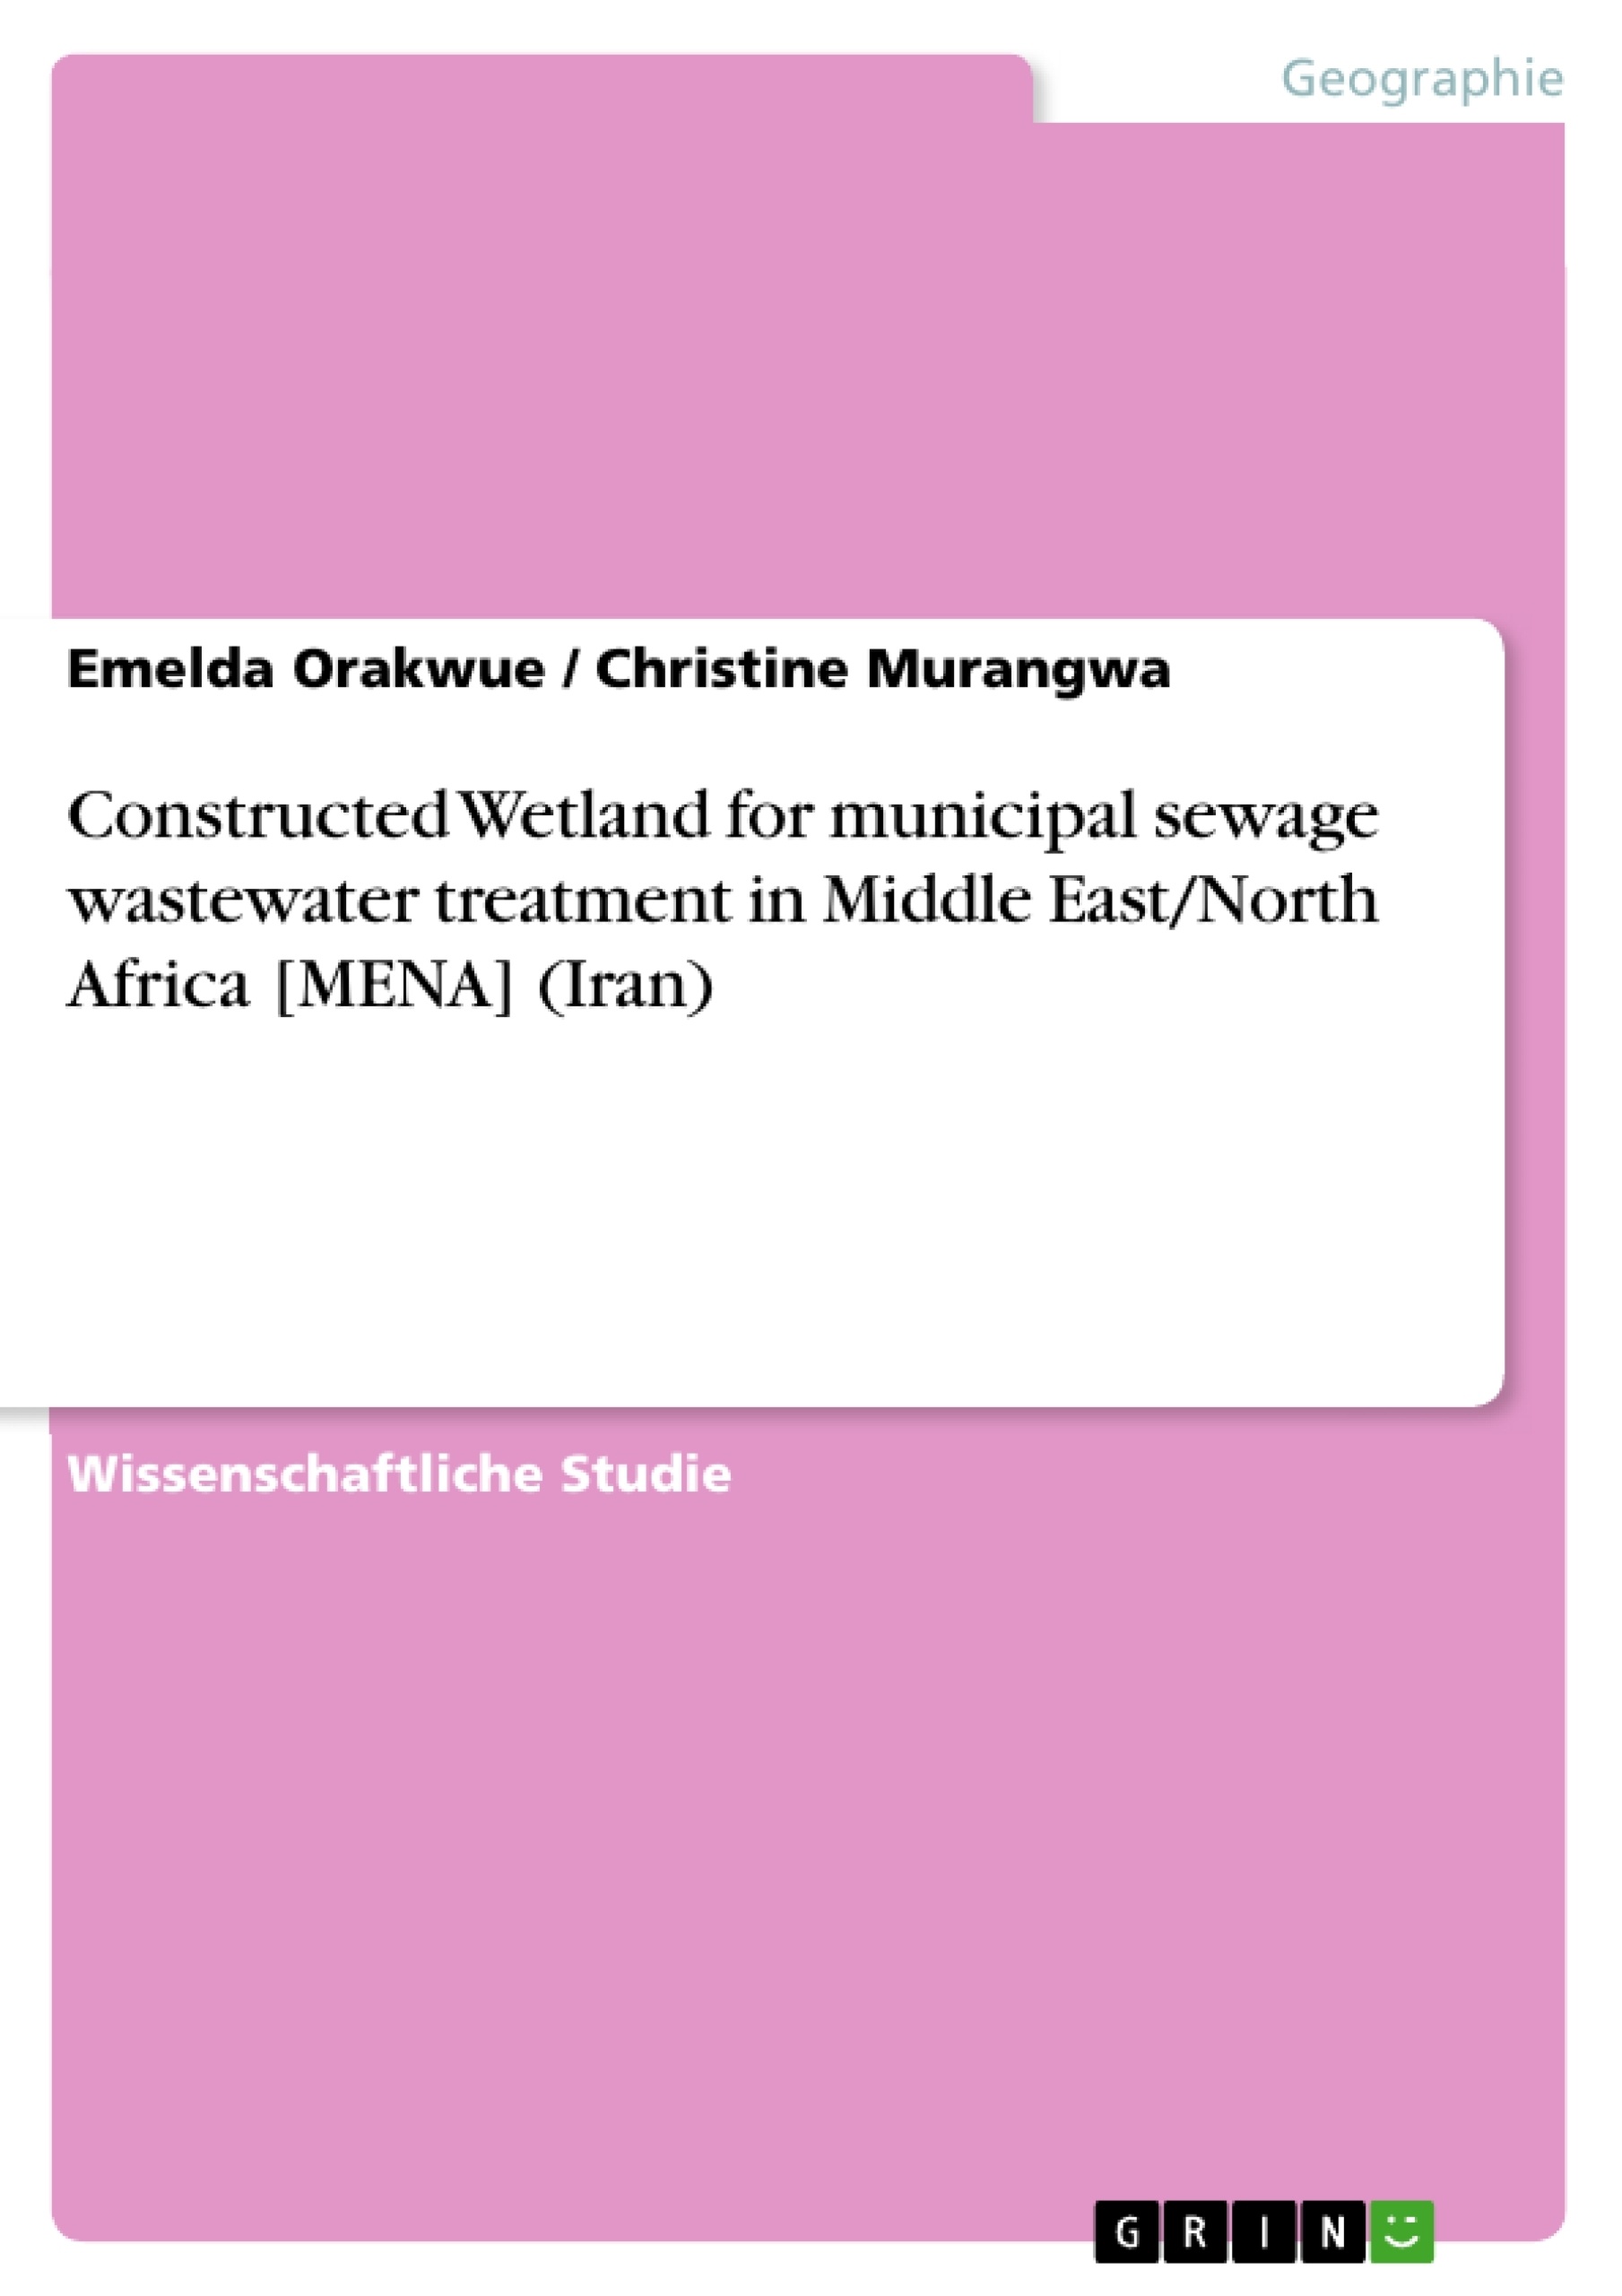 Titre: Constructed Wetland for municipal sewage wastewater treatment in Middle East/North Africa [MENA] (Iran)